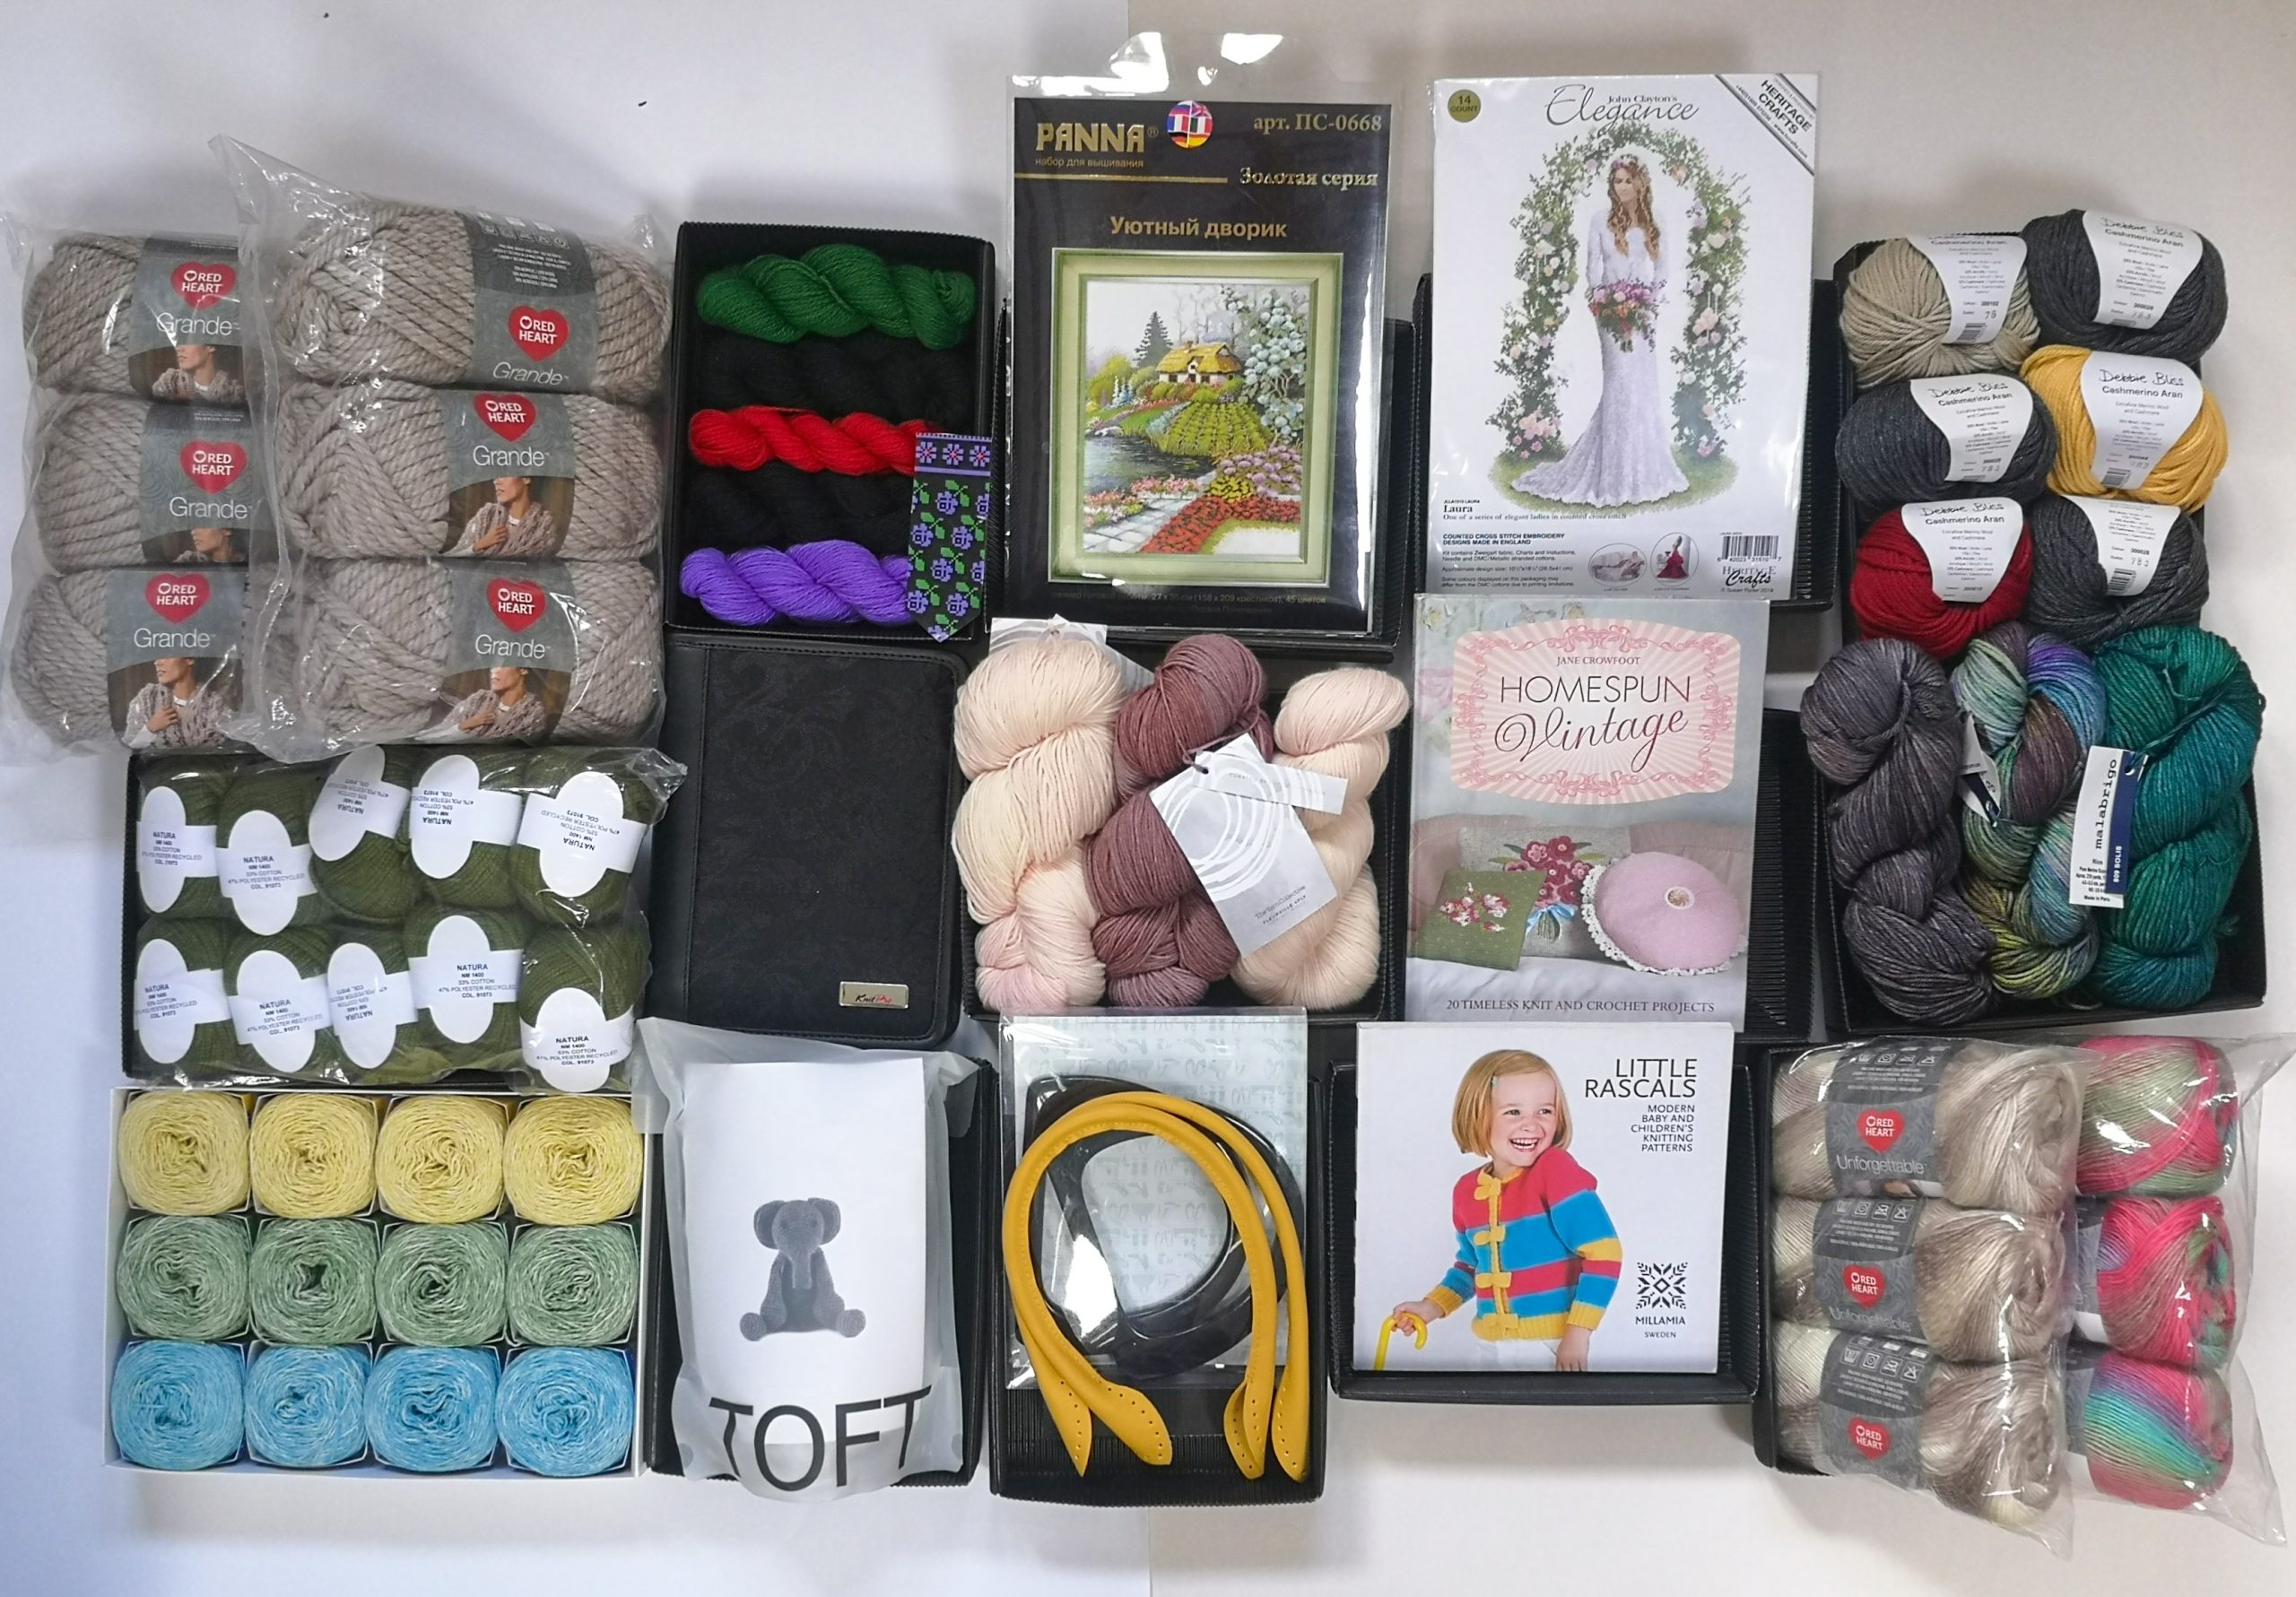 A picture taken from above of a variety of the potential prize you could receive in the Knit for Peace Lucky Dip: yarn, knitting supplies, embroidery kits and other crafting materials.